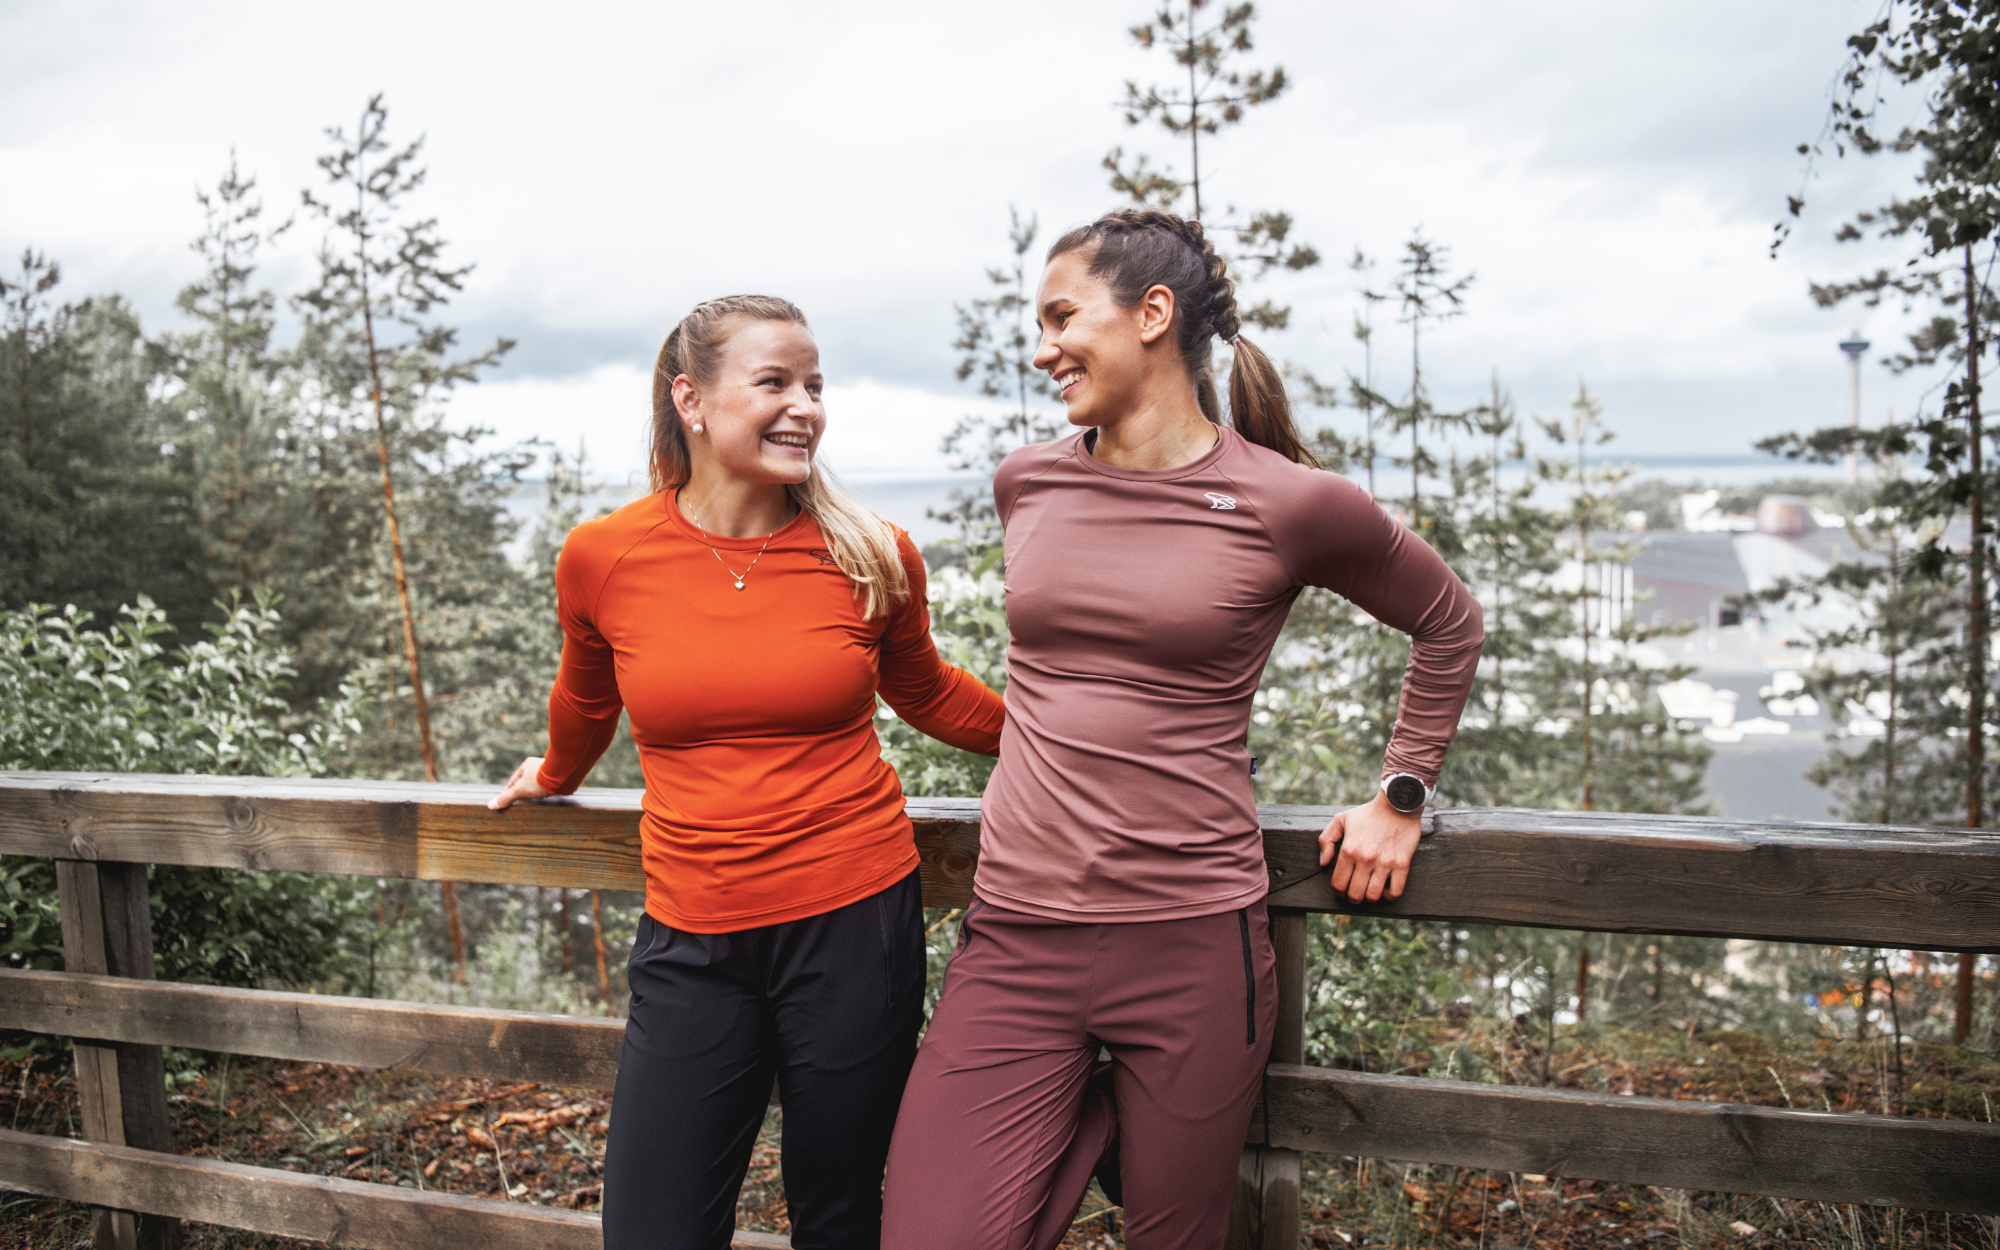 Take a look at the new sustainable sports clothing brands at